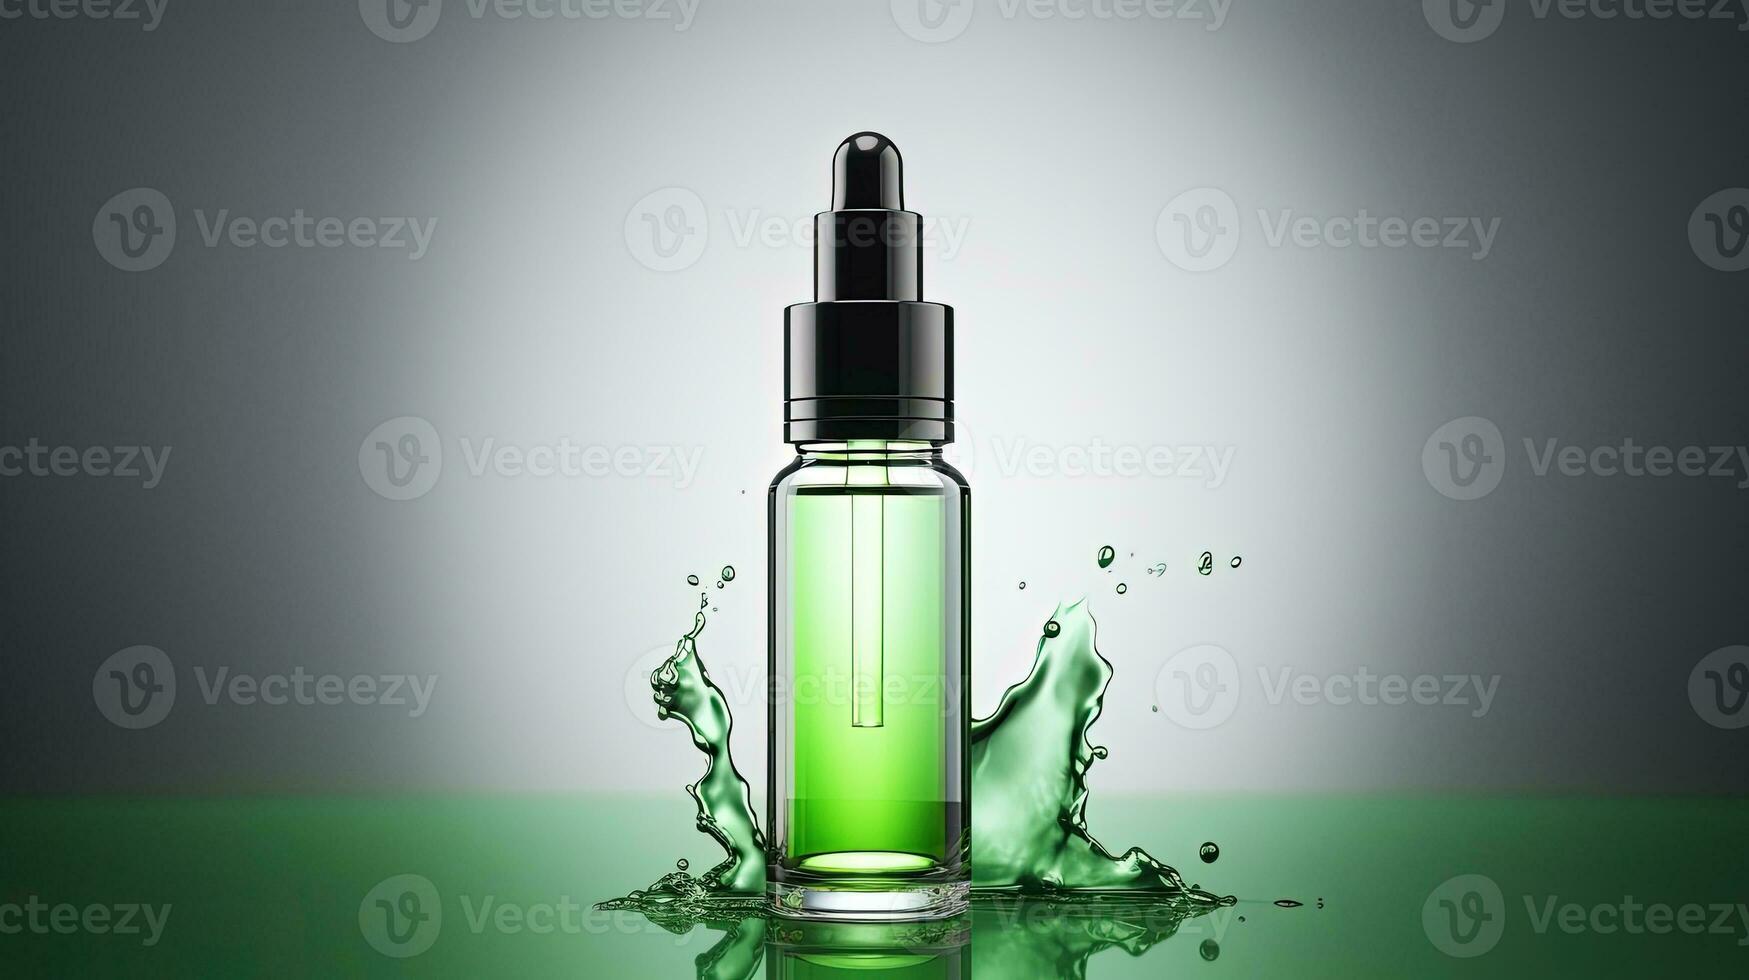 Green e liquid advertisement showing bottle on white background with space for text. silhouette concept photo